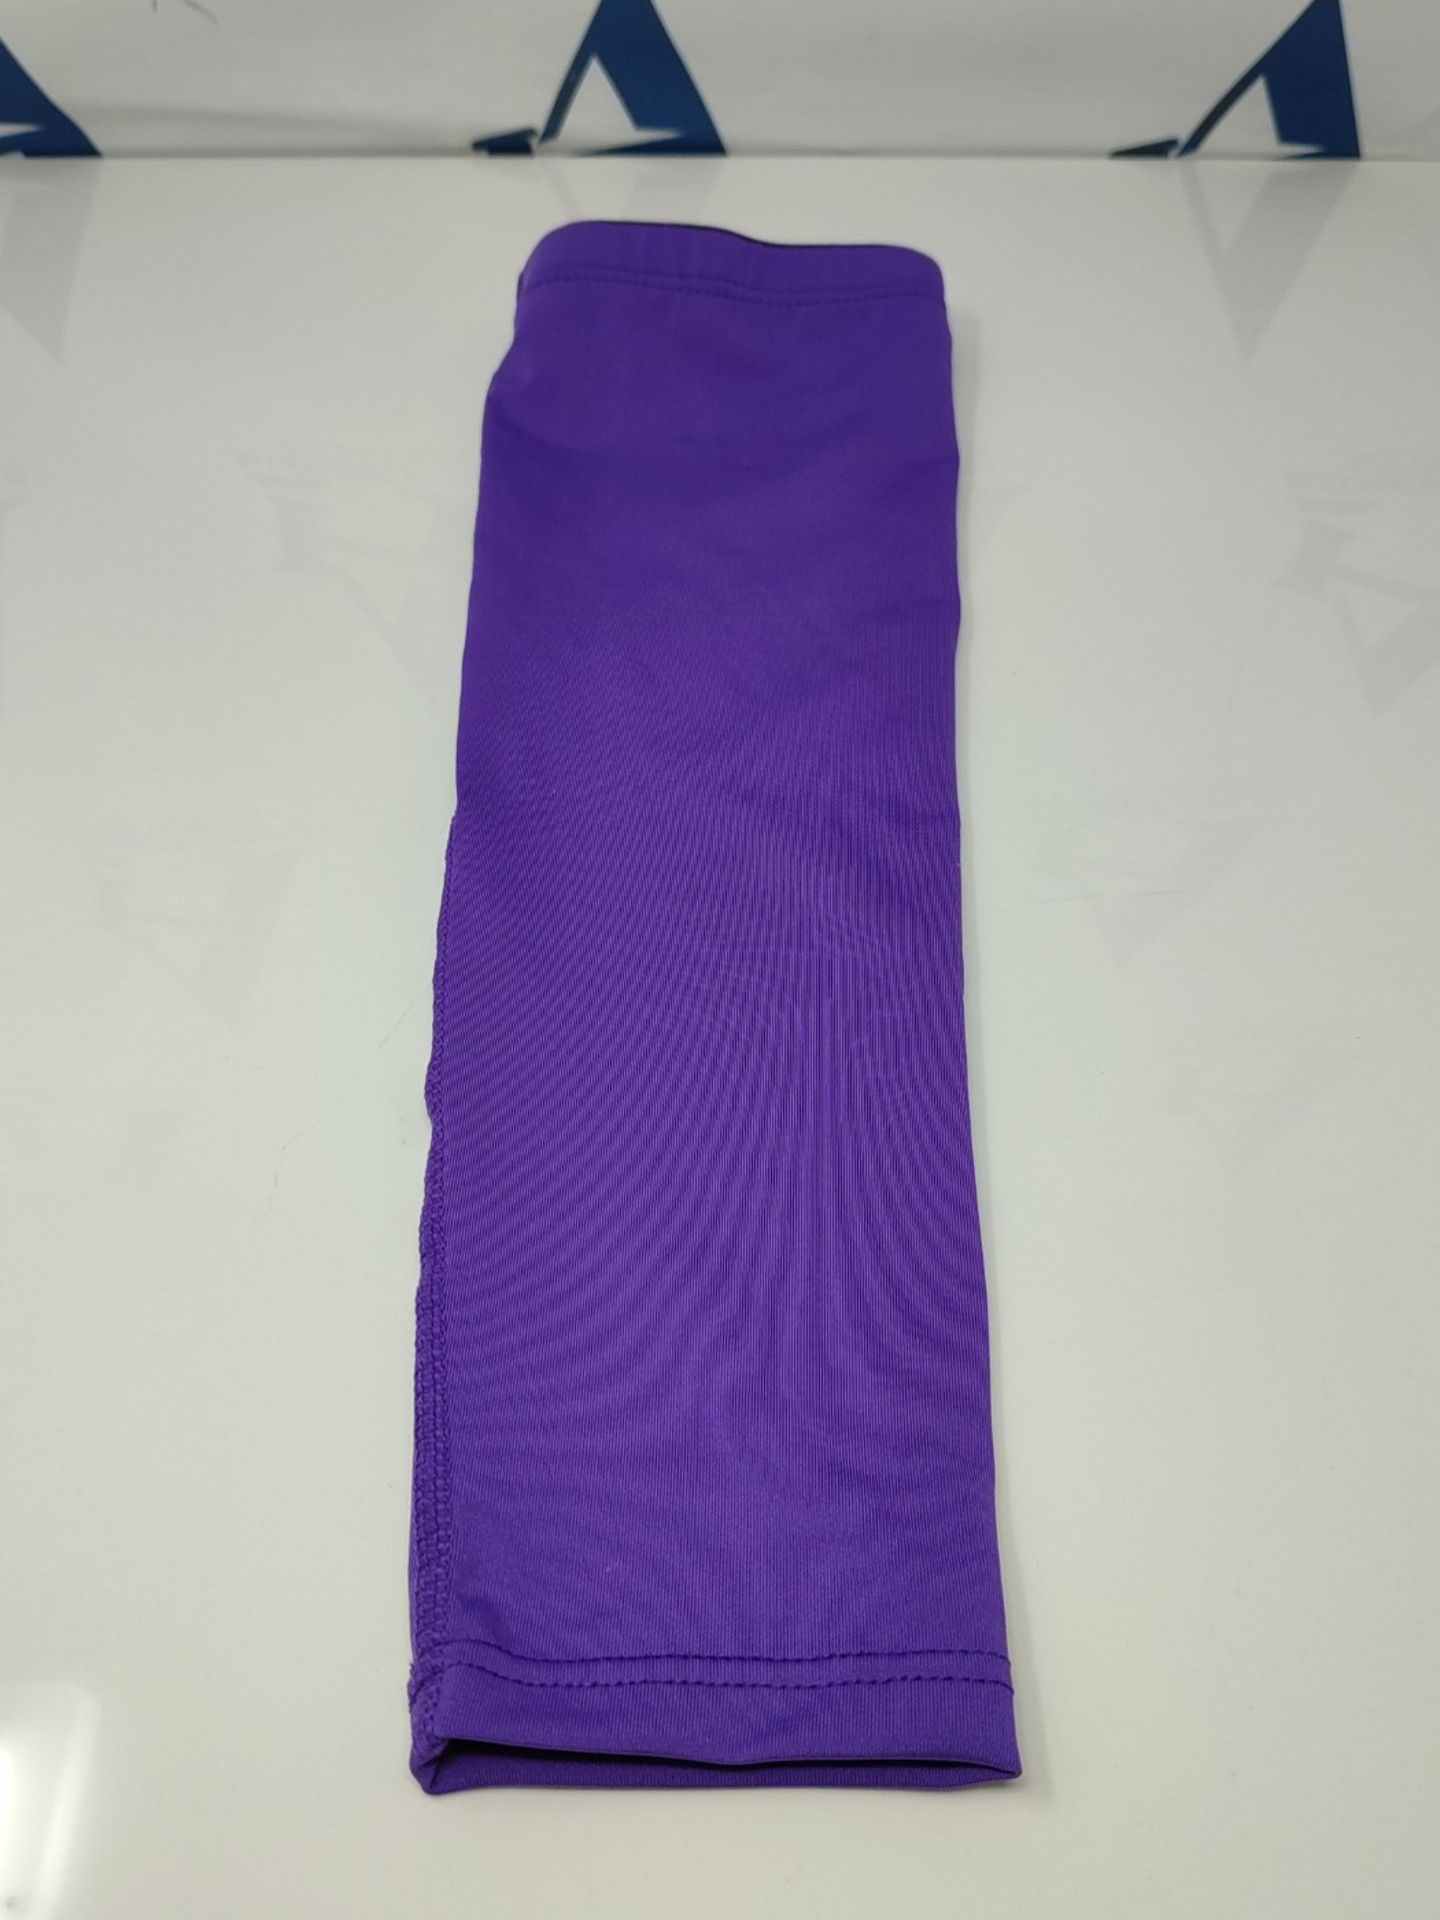 360 RELIEF UV Arm Sleeve - Sun Protection Anti-Slip Thin Breathable Cooling Summer Out - Image 2 of 2